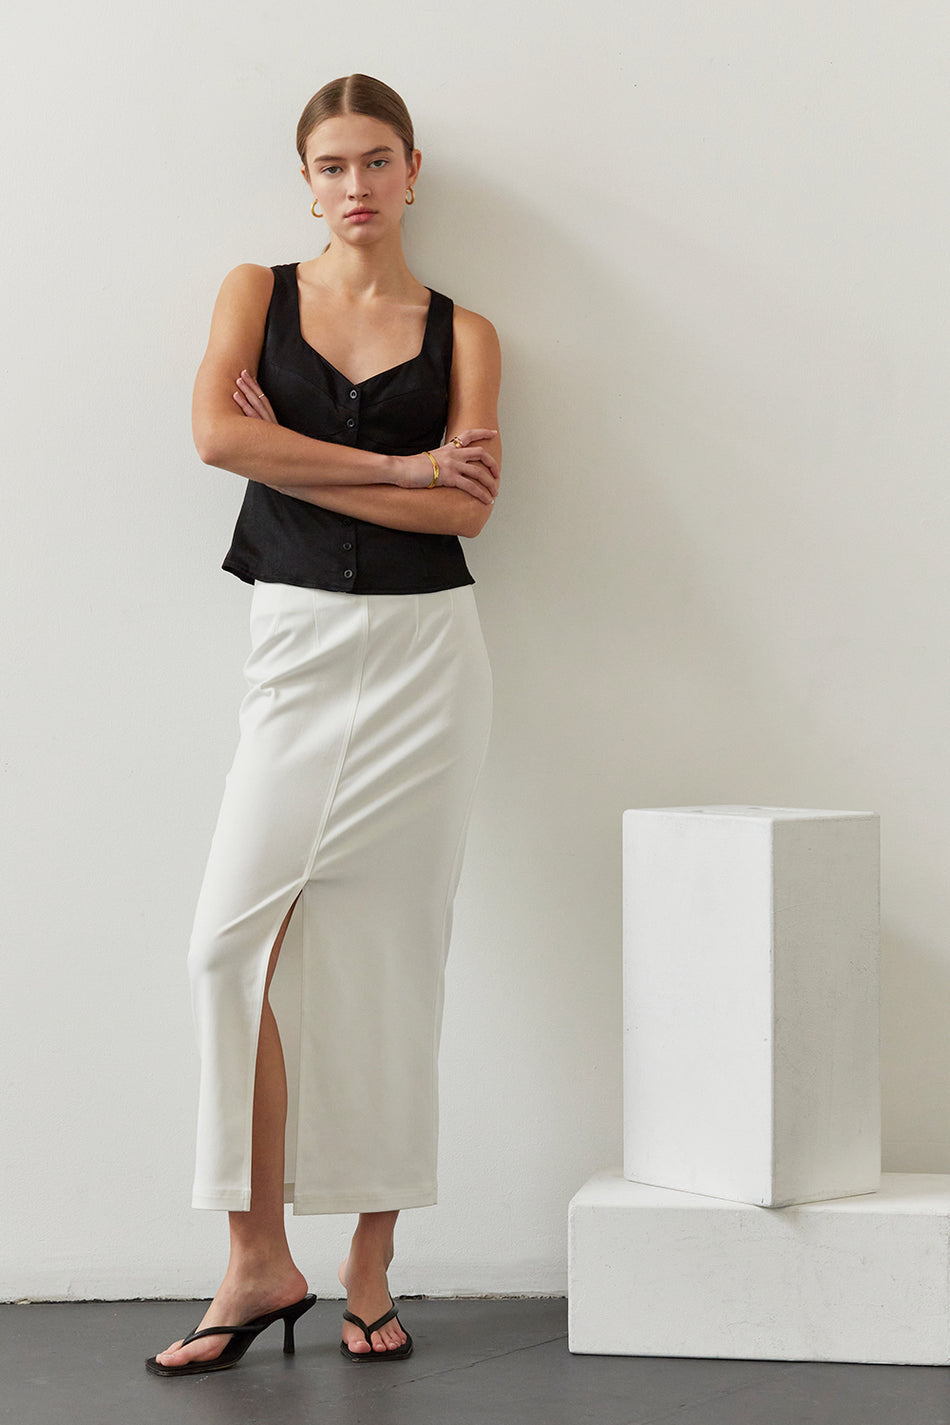 a model in a black sleeveless top and a white midi skirt